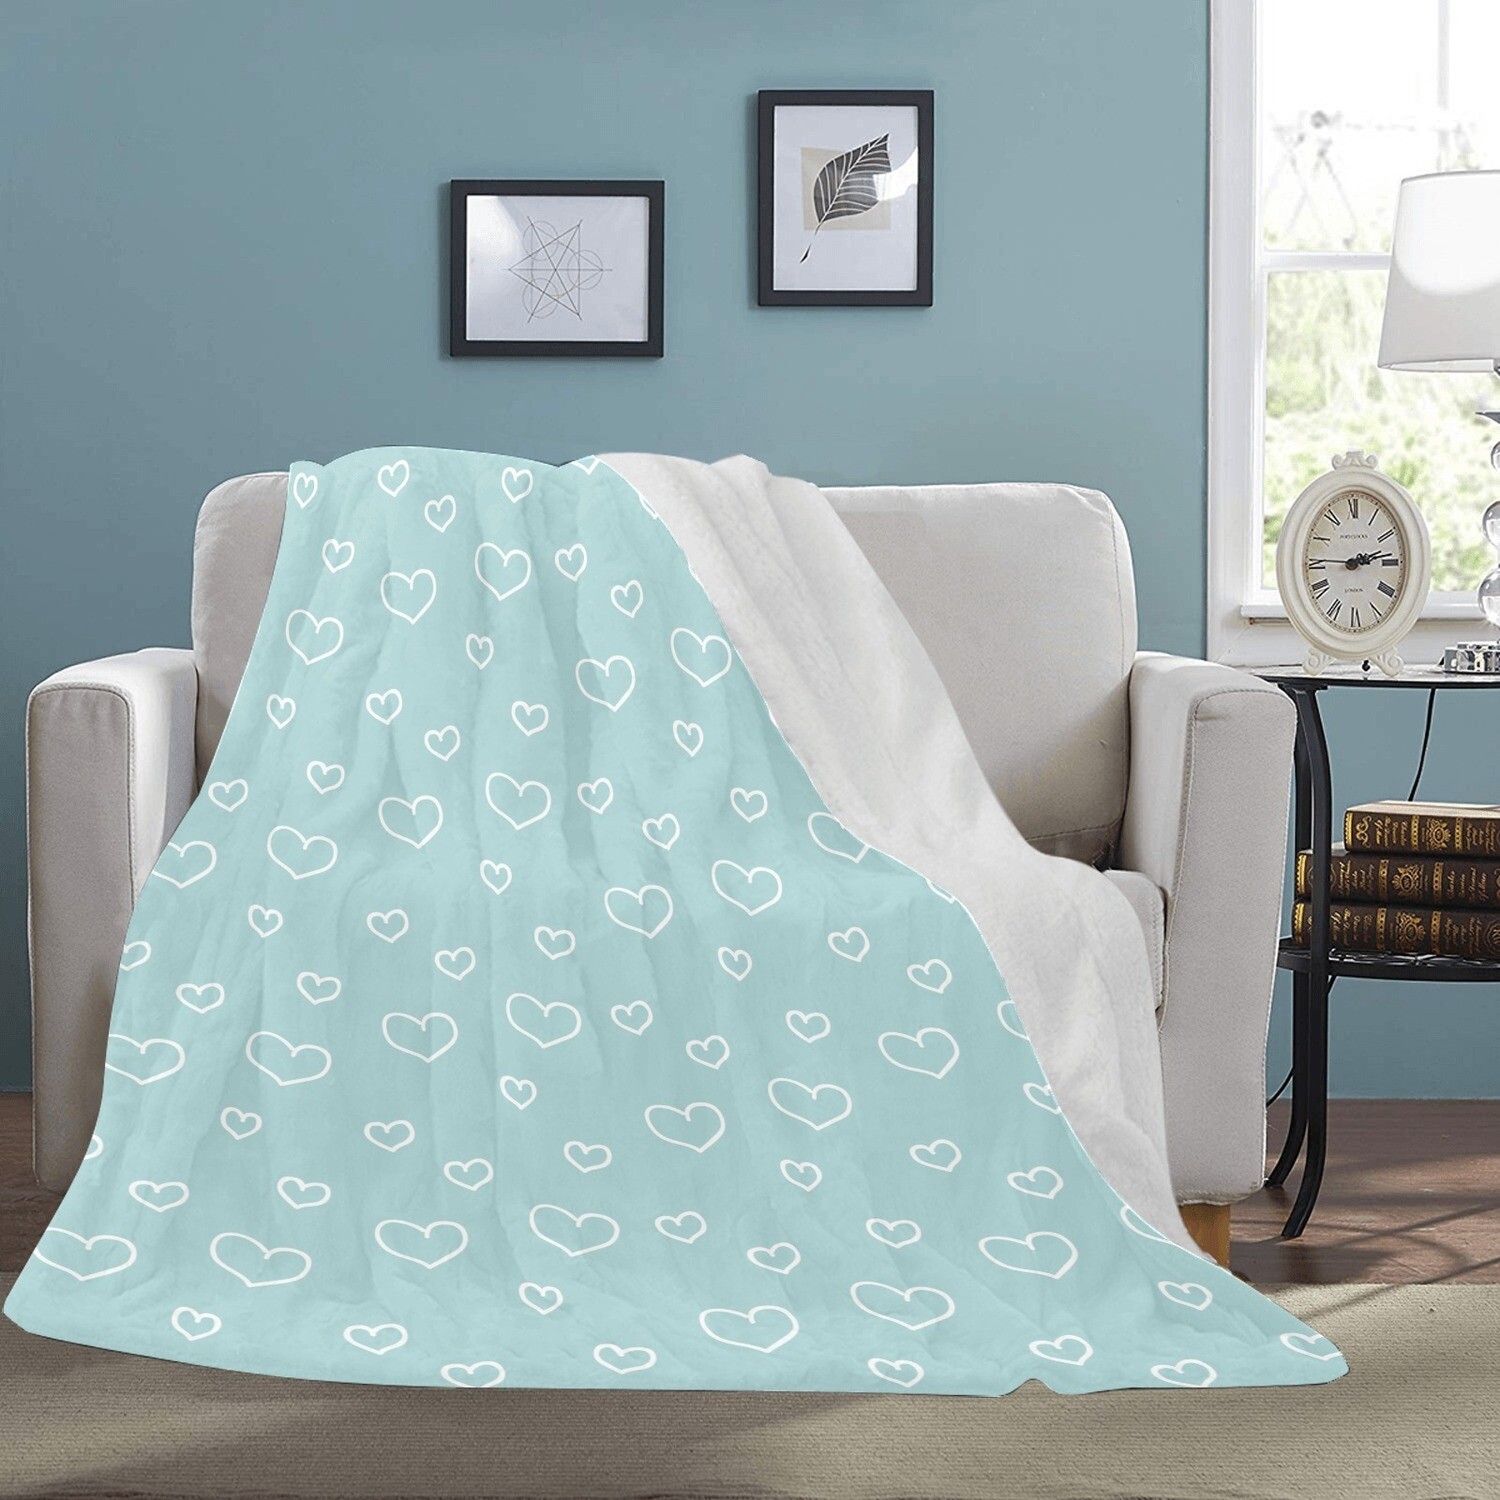 🤴🏽👸🏽💕Large Ultra-Soft Micro Fleece Blanket Valentine white outline hearts on light teal, gift, gift for her, gift for him, gift for them, 70"x80"